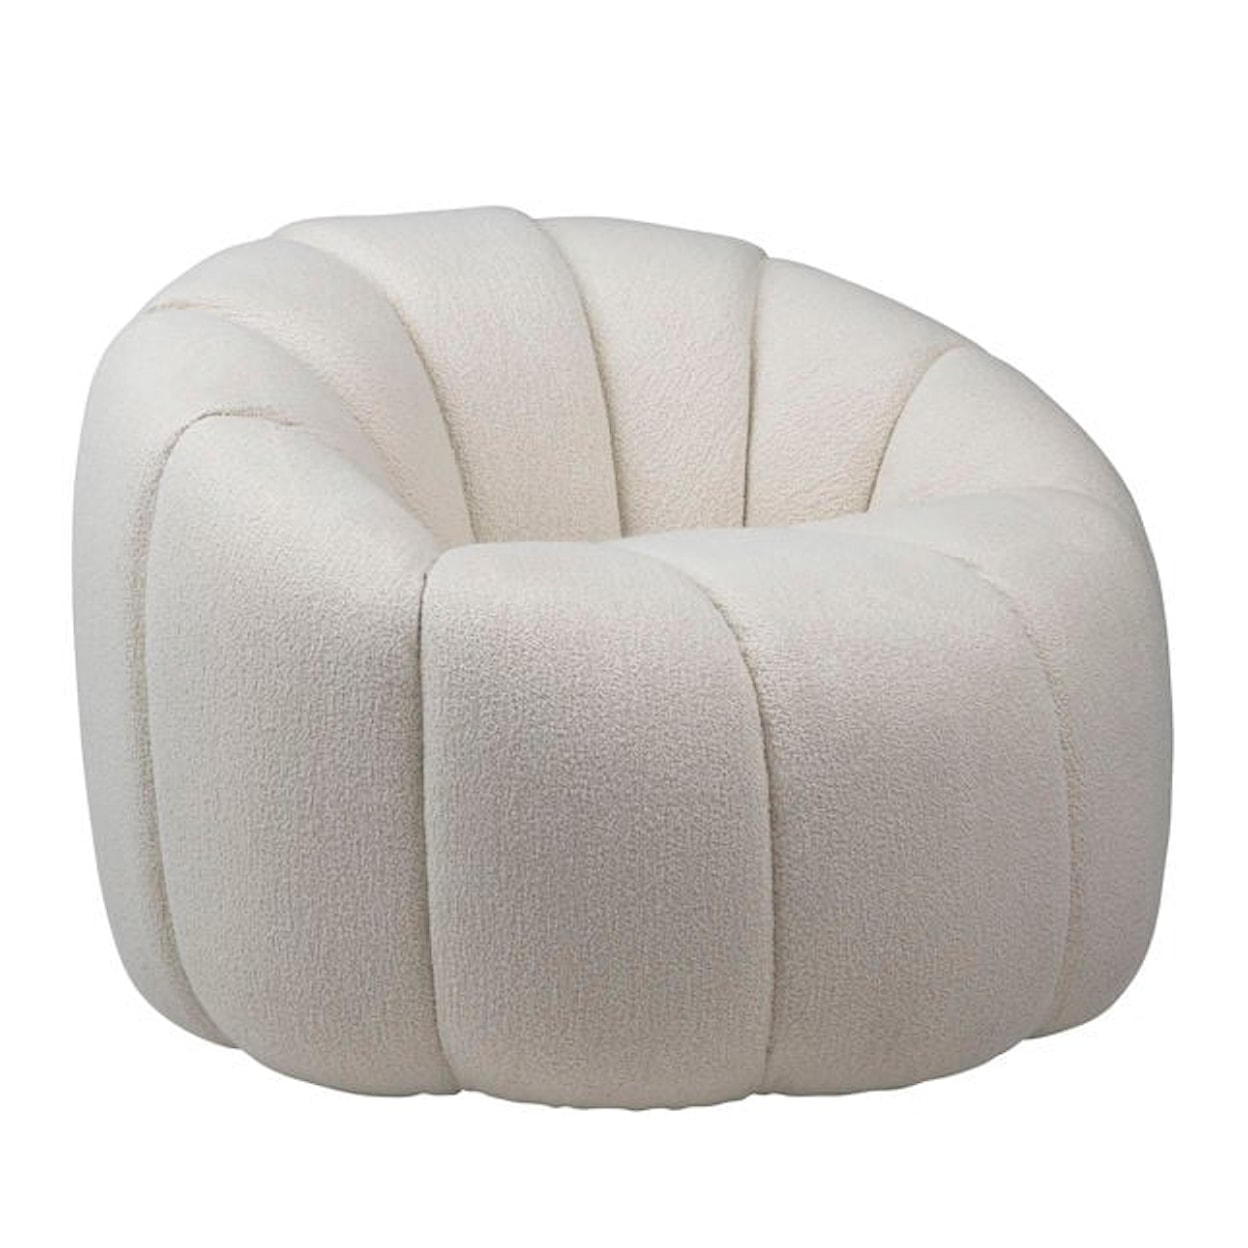 Dovetail Furniture Dovetail Accessories Symone Swivel Chair